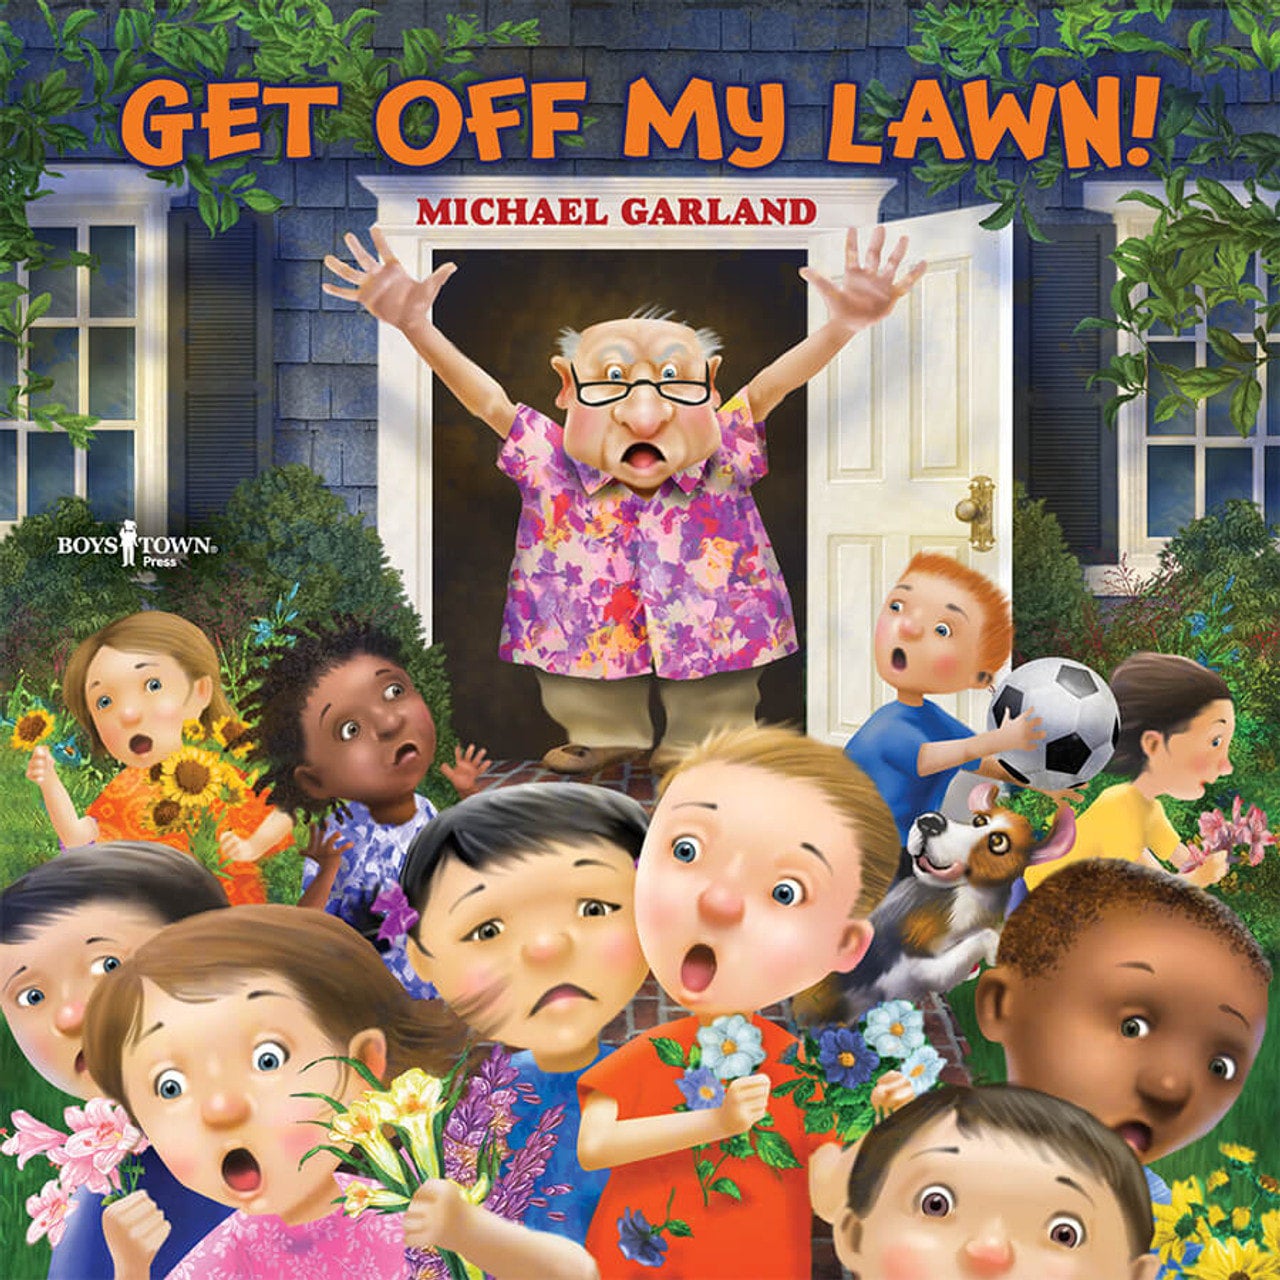 Get Off My Lawn! -  How to Look at Situations From the Point of View of Others - Michael Garland